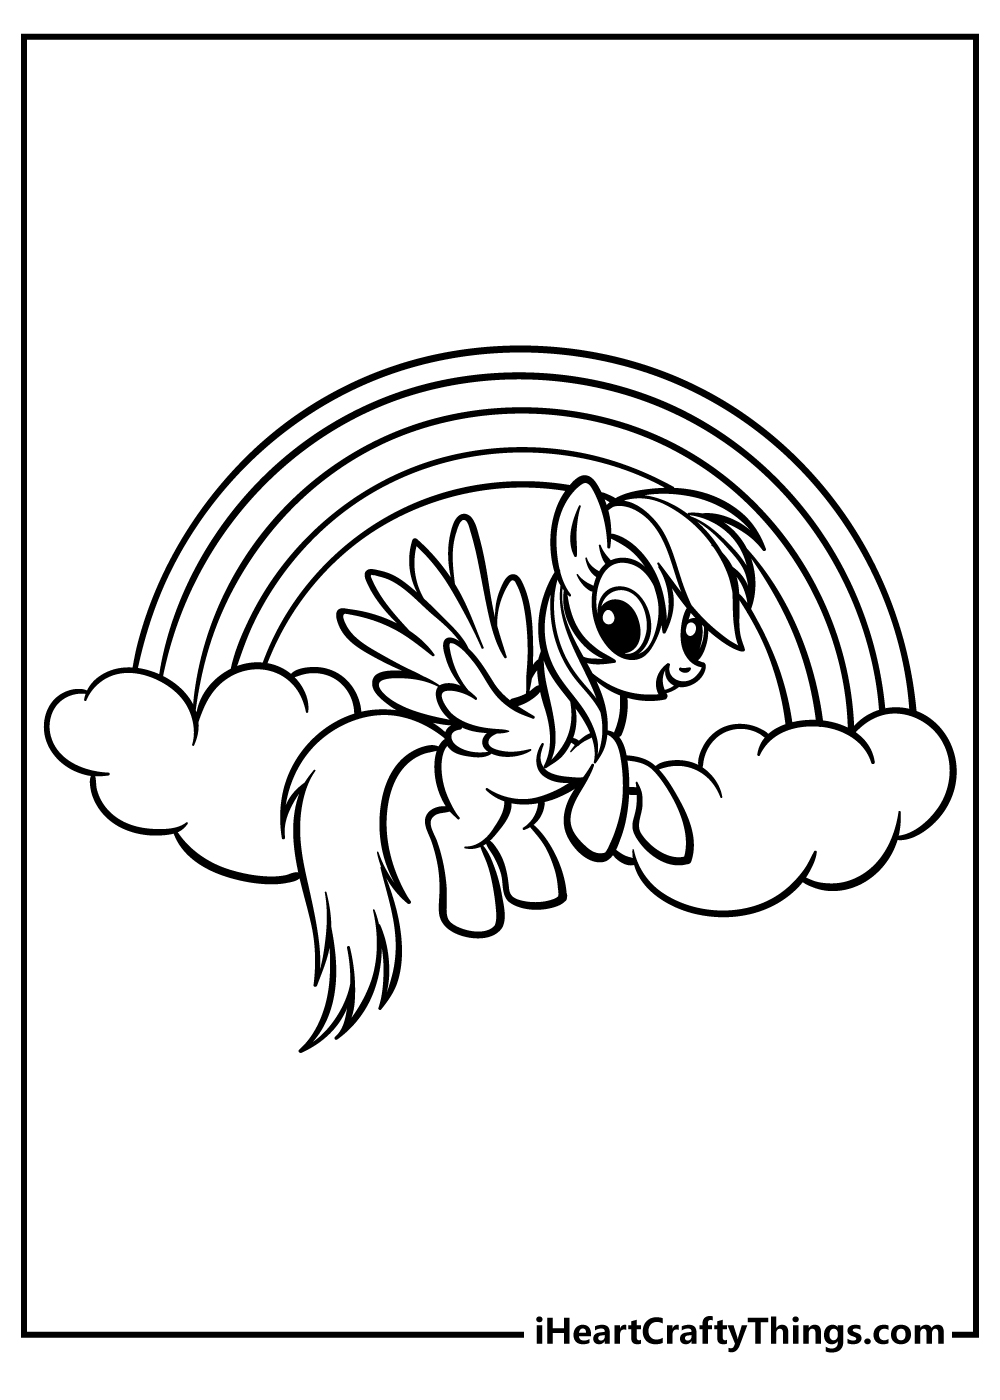 Rainbow dash coloring pages free printables